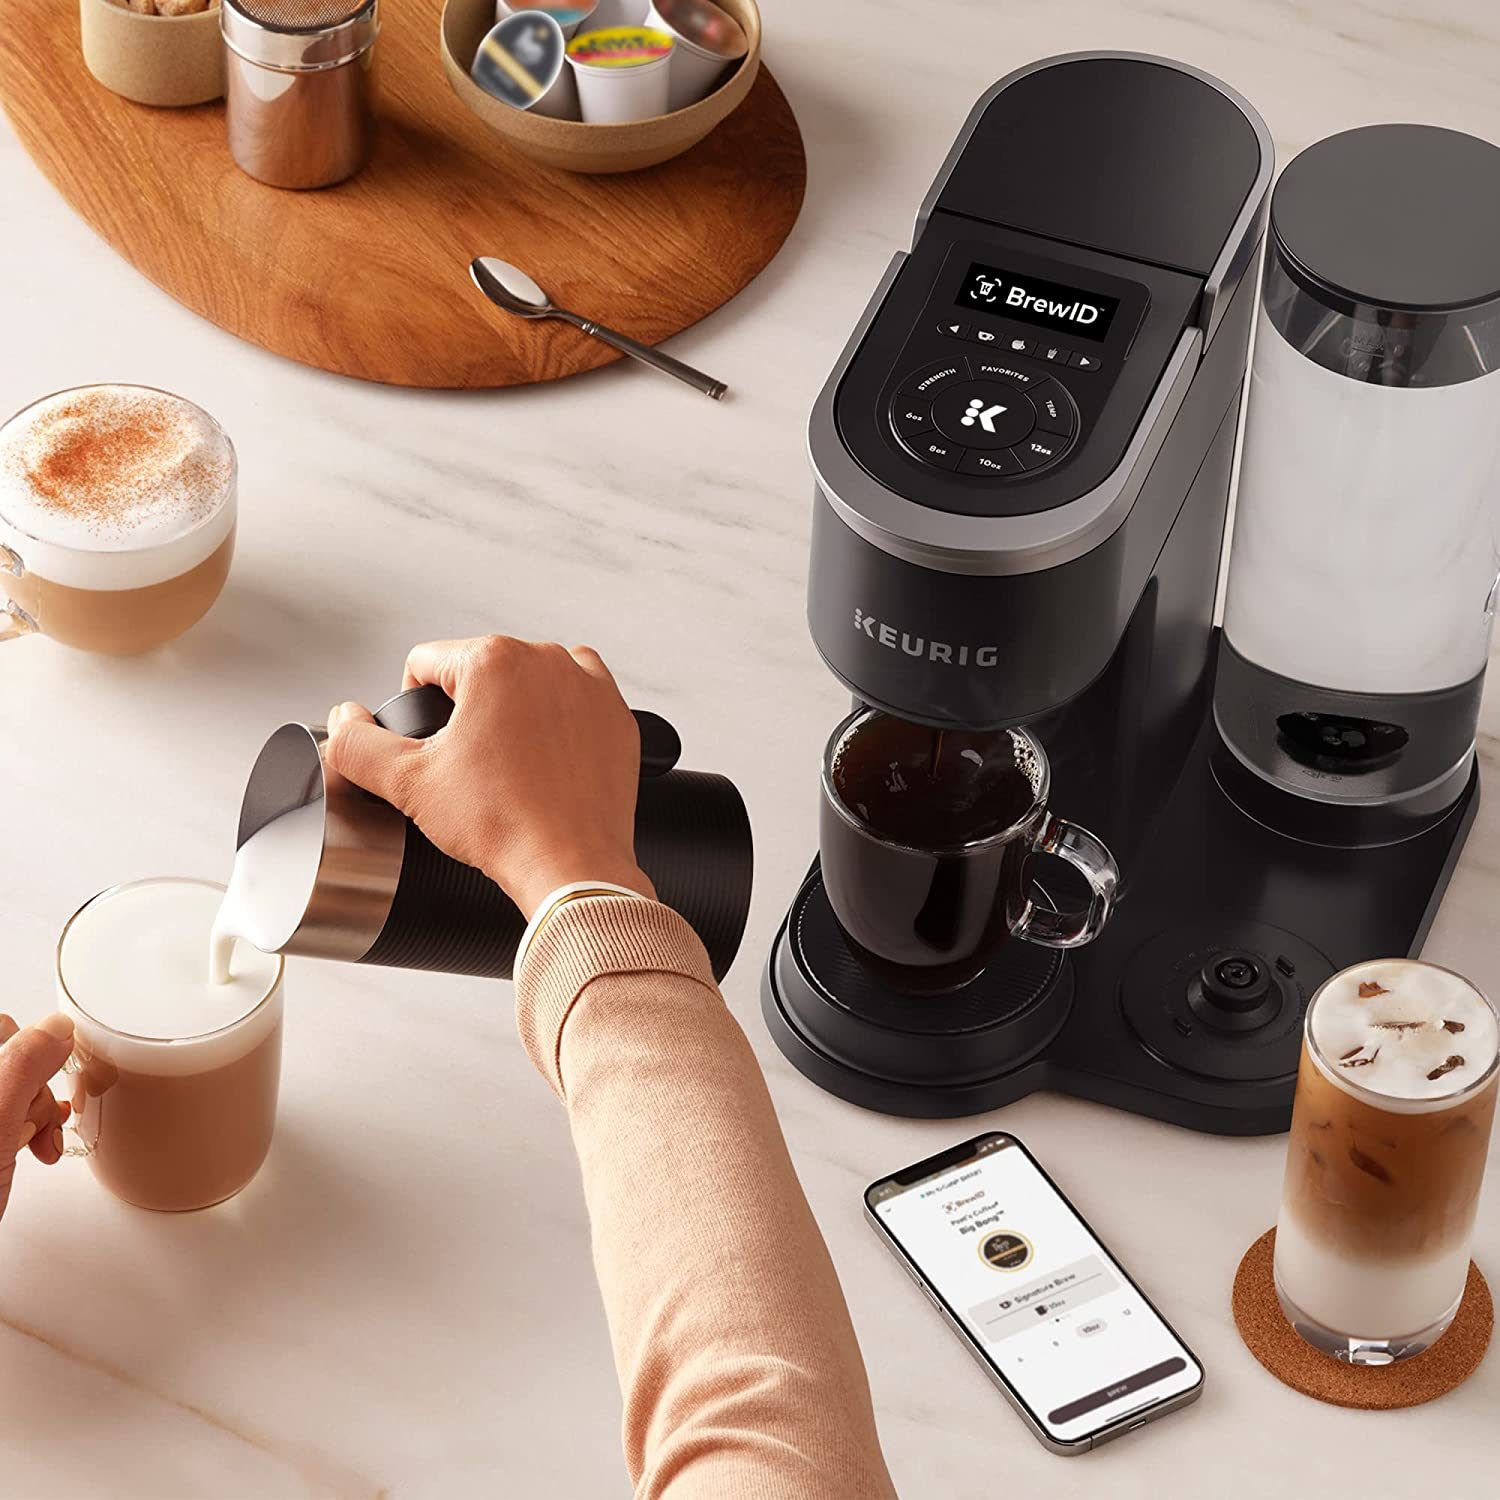 The 7 Best One Cup Coffee Makers 2023 (Plus 1 to Avoid)